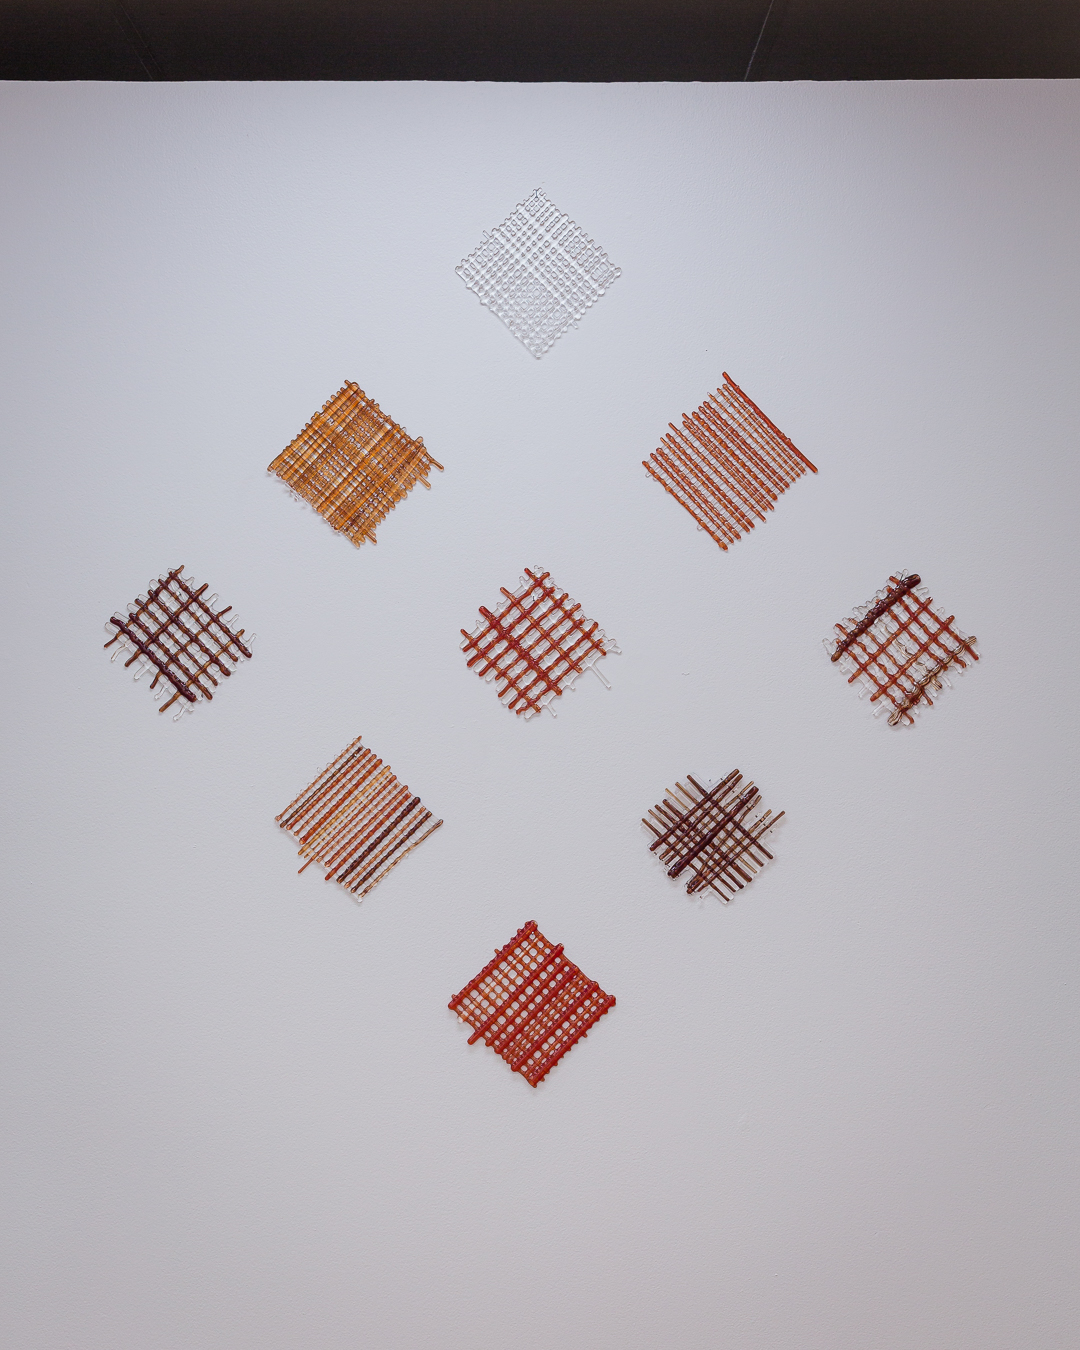 Emily Greenwood, <em>Food For Thoughts: A Question of Intergenerational Memory?</em>, 2021, series of 9 hand crafted glass canes, kiln formed, 20x20x2cm each, Pari. Photographer: Document Photography